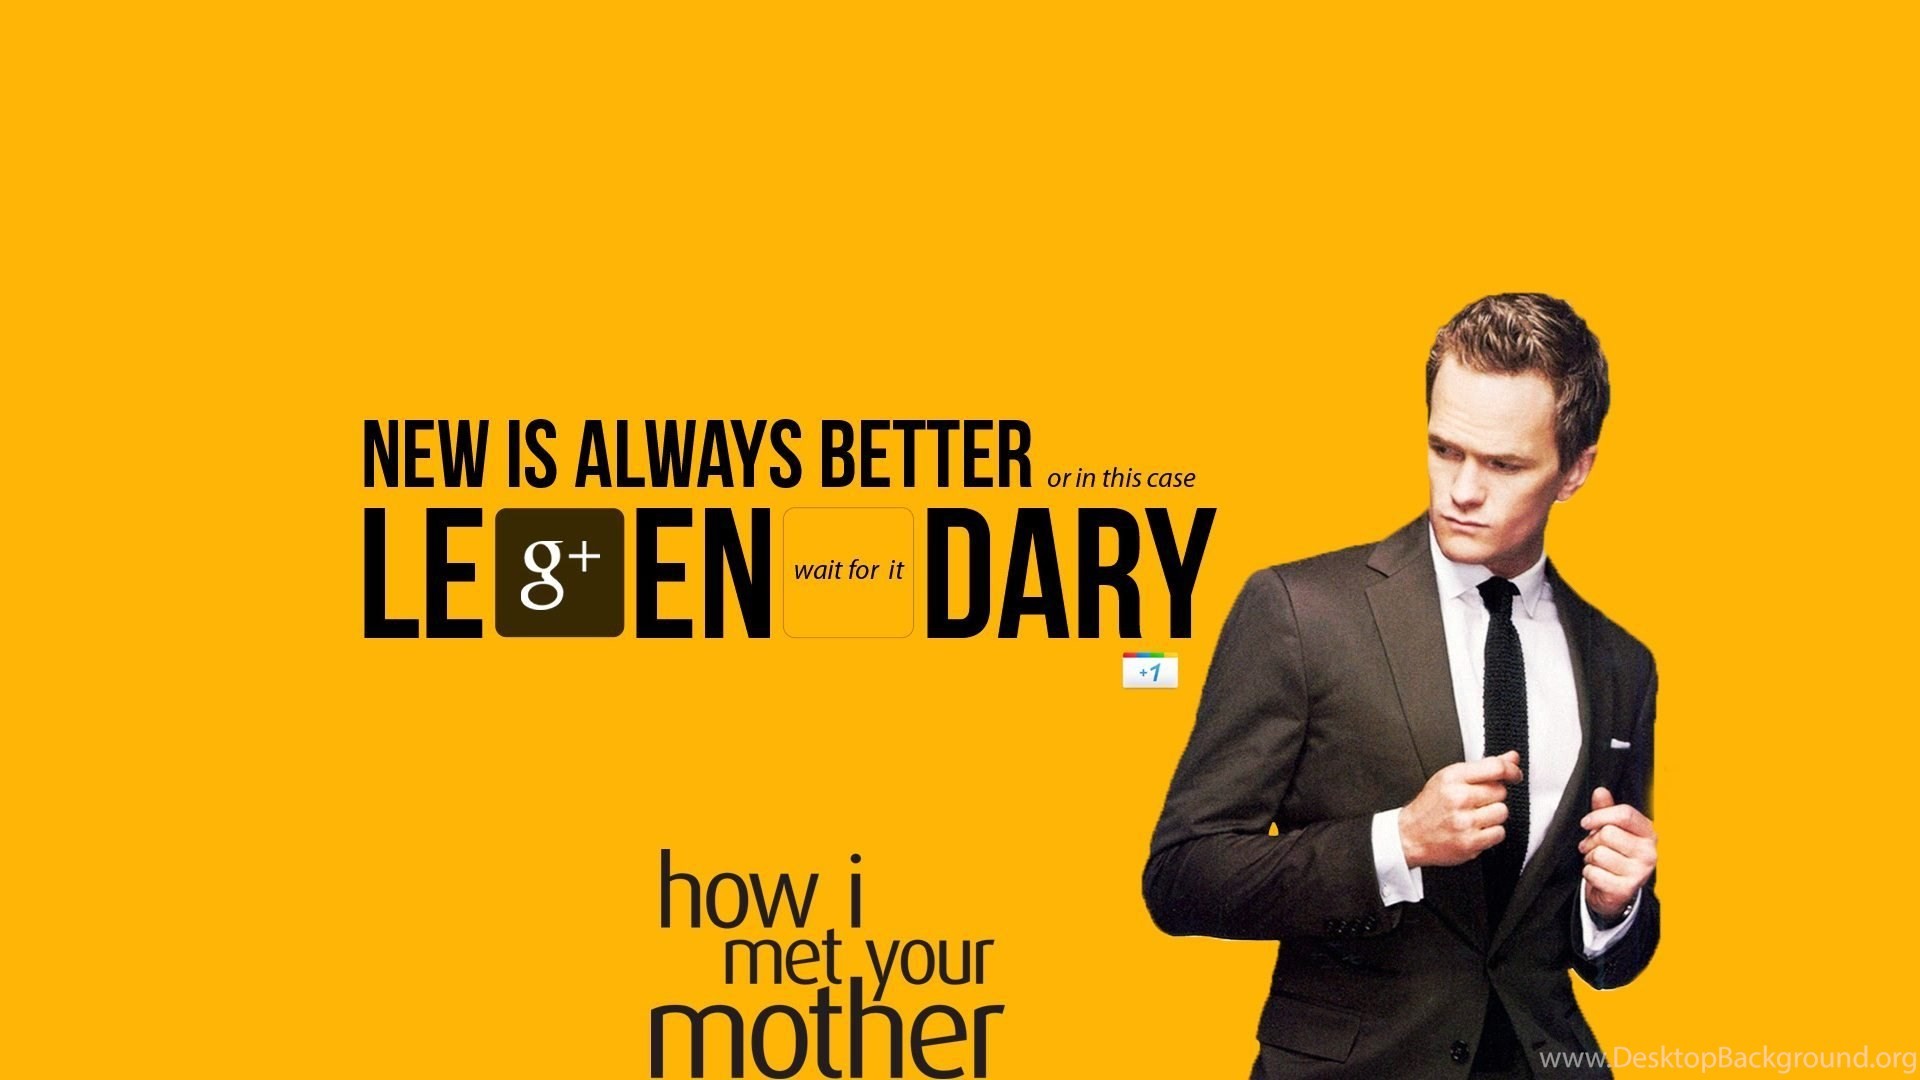 How I Met Your Mother Comedy Sitcom Series Television - Met Your Mother - HD Wallpaper 